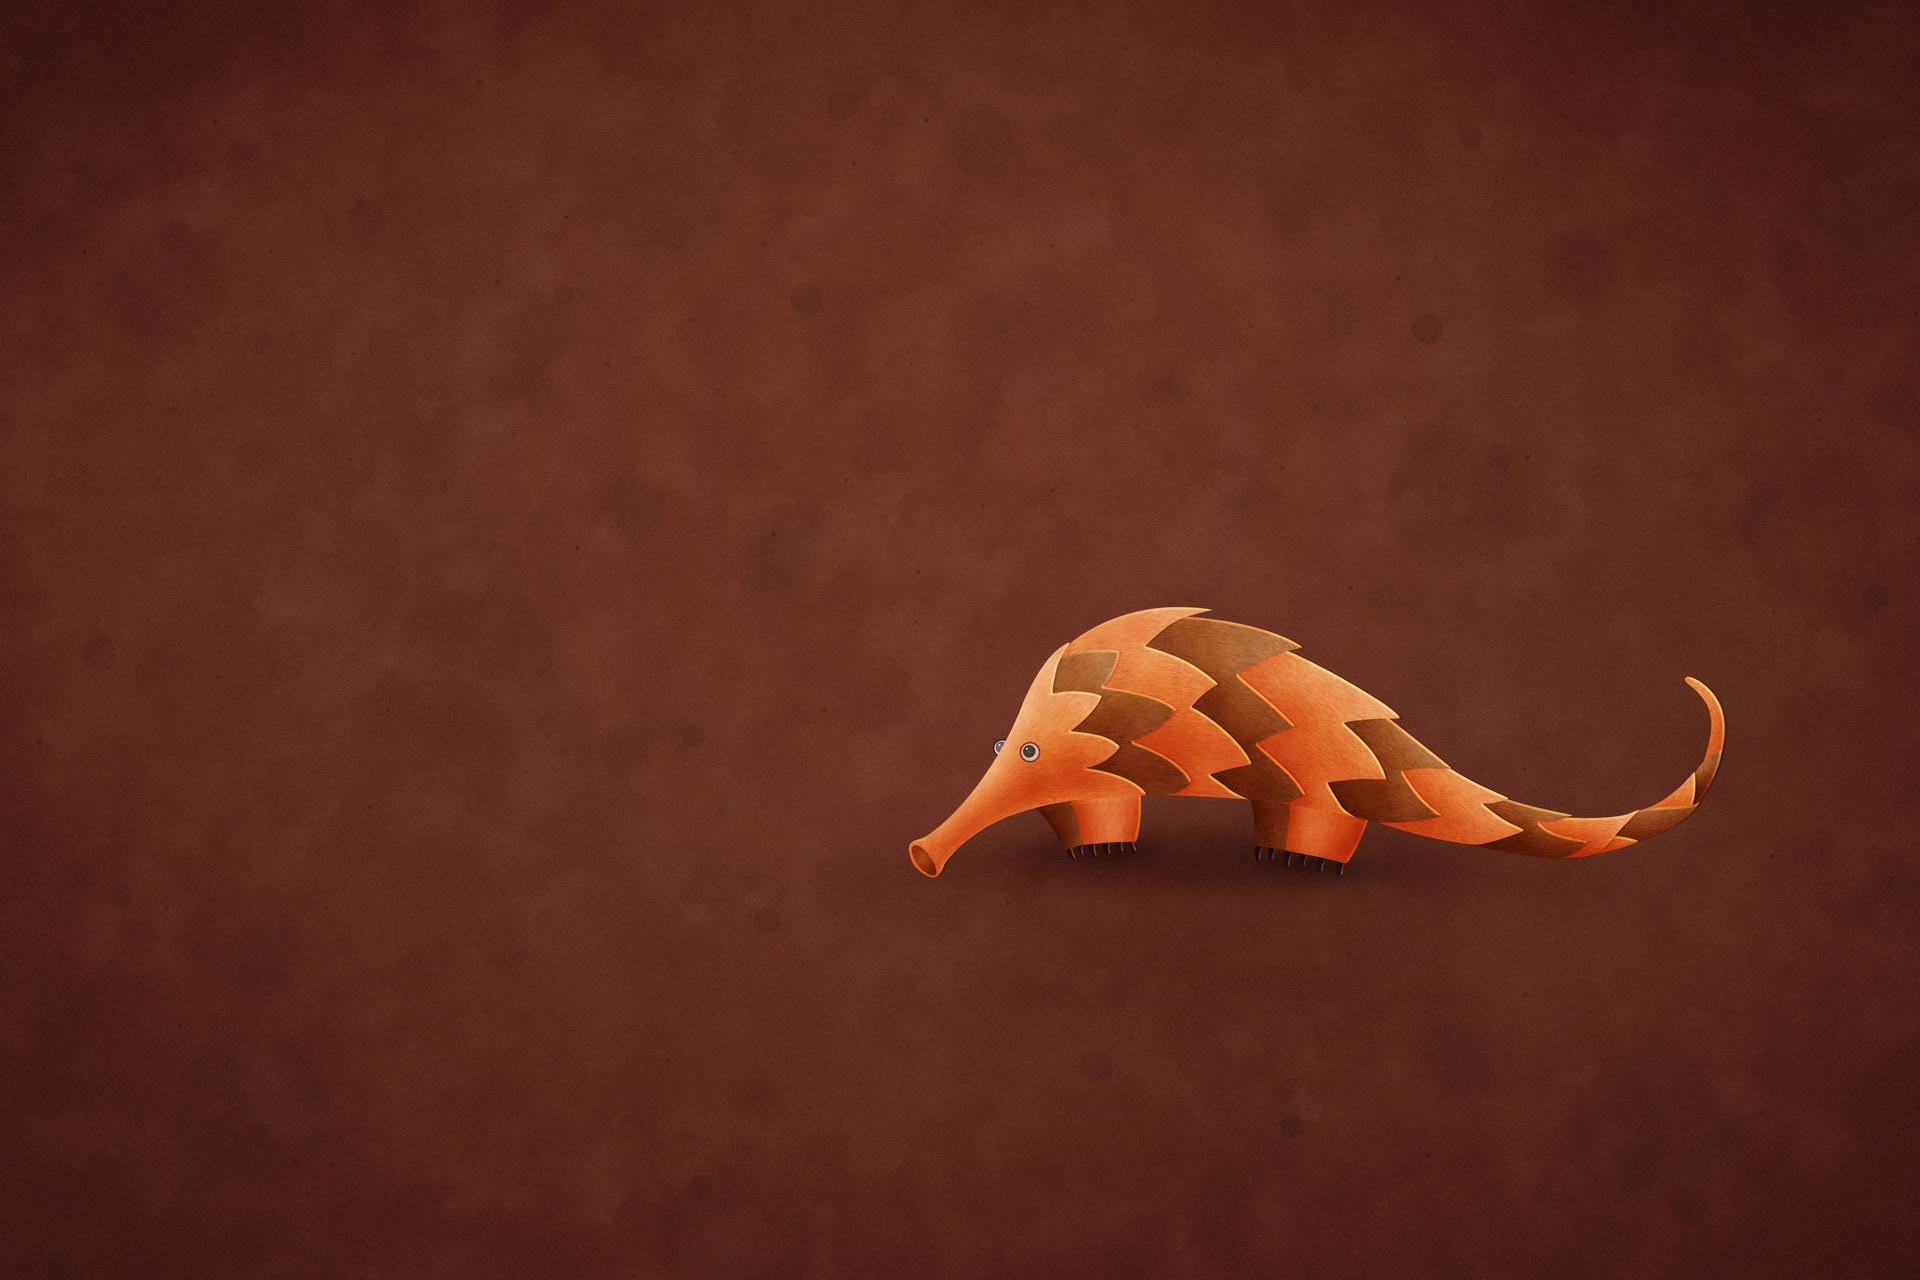 The wallpapers included in Ubuntu 12.04 – Precise Pangolin